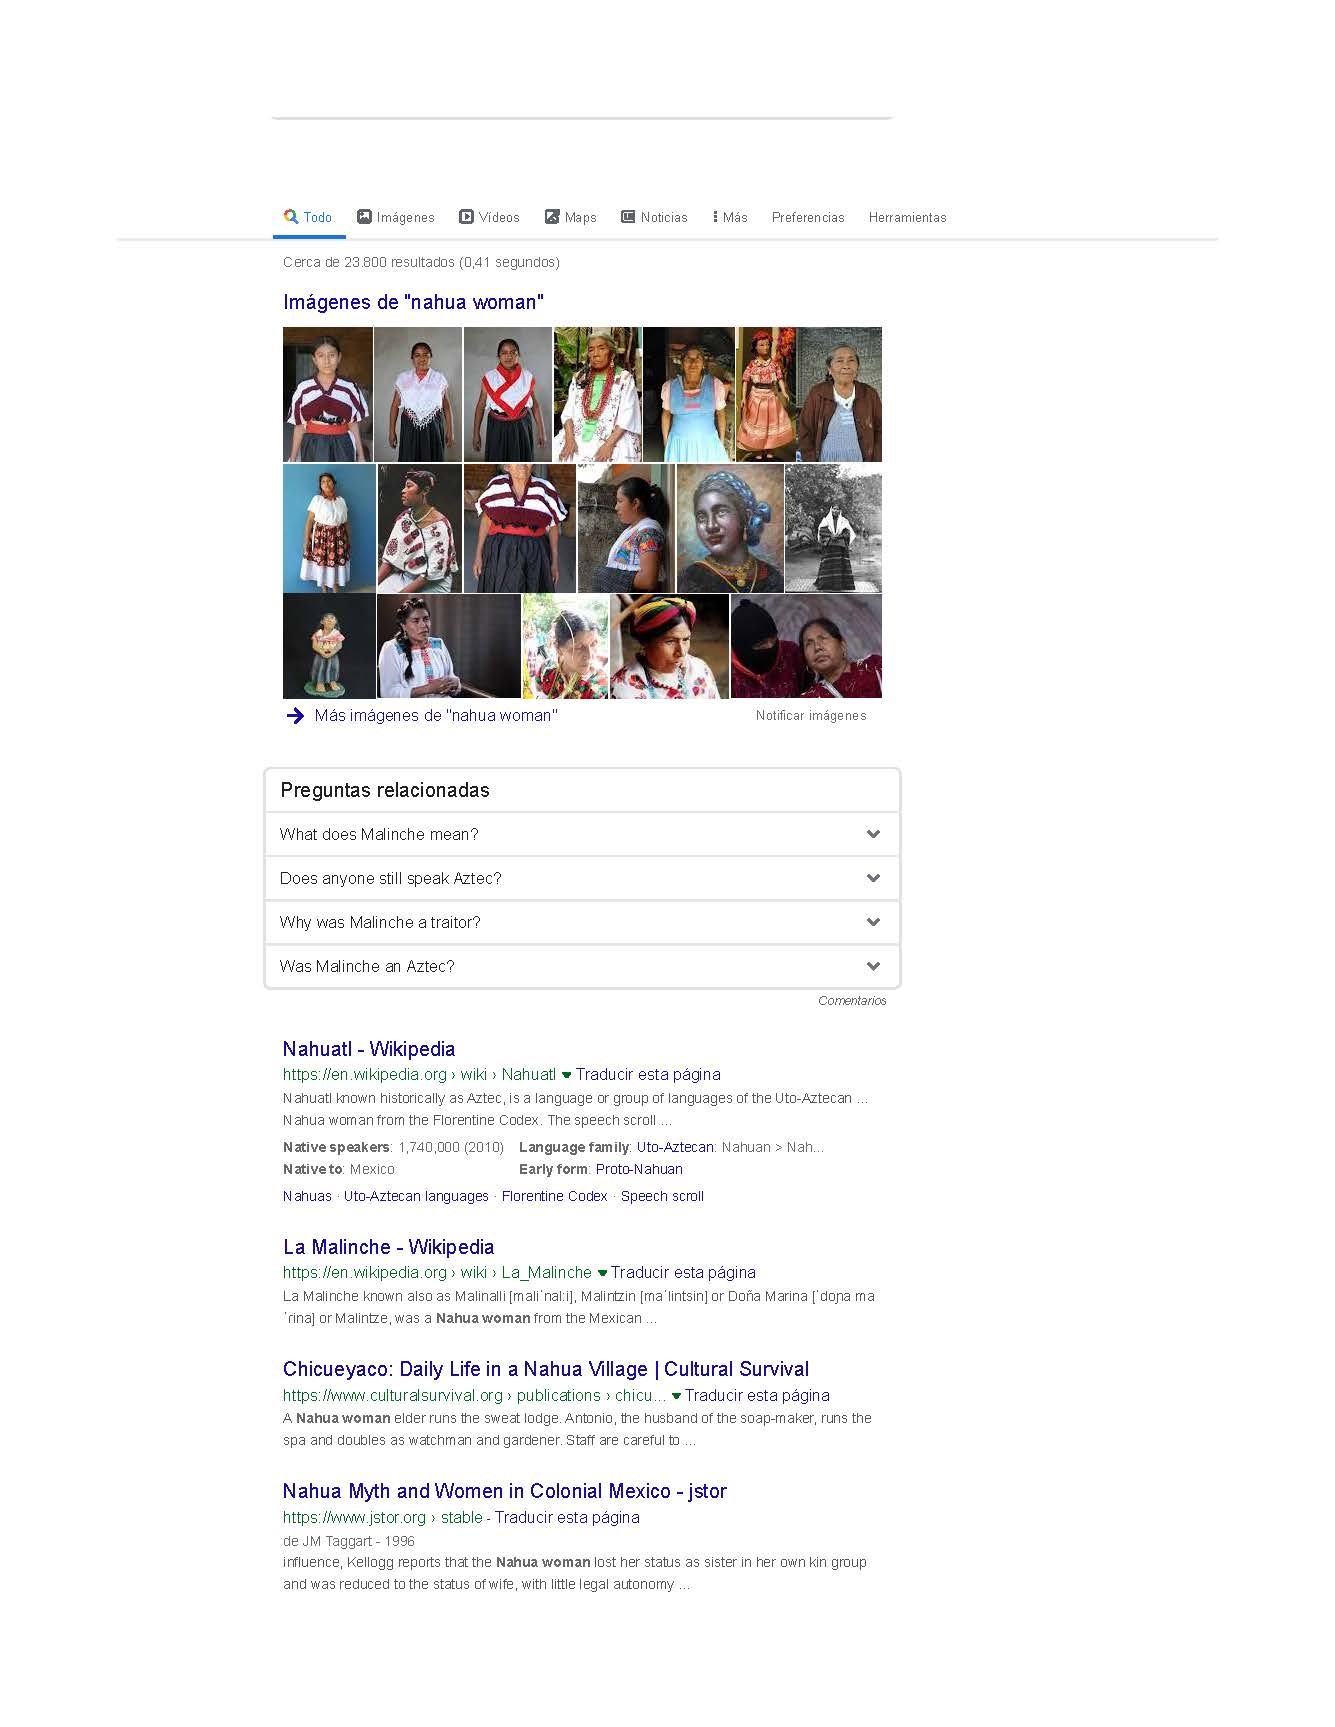 Google Web search results for “Nahua Woman”